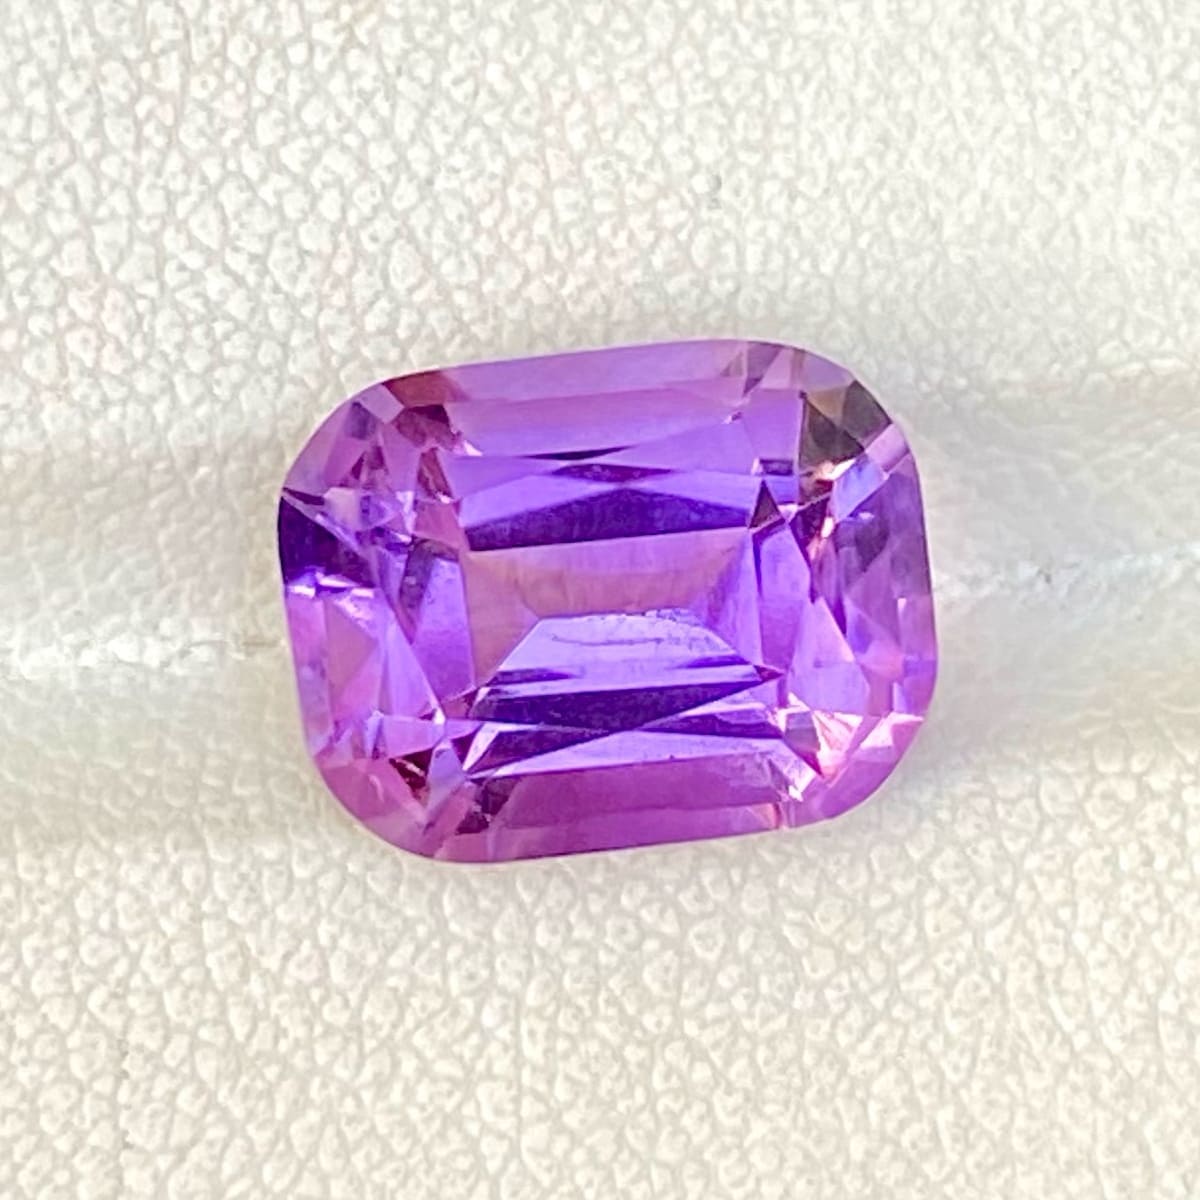 Buy 6.05 Carats Faceted Lavender Purple Amethyst